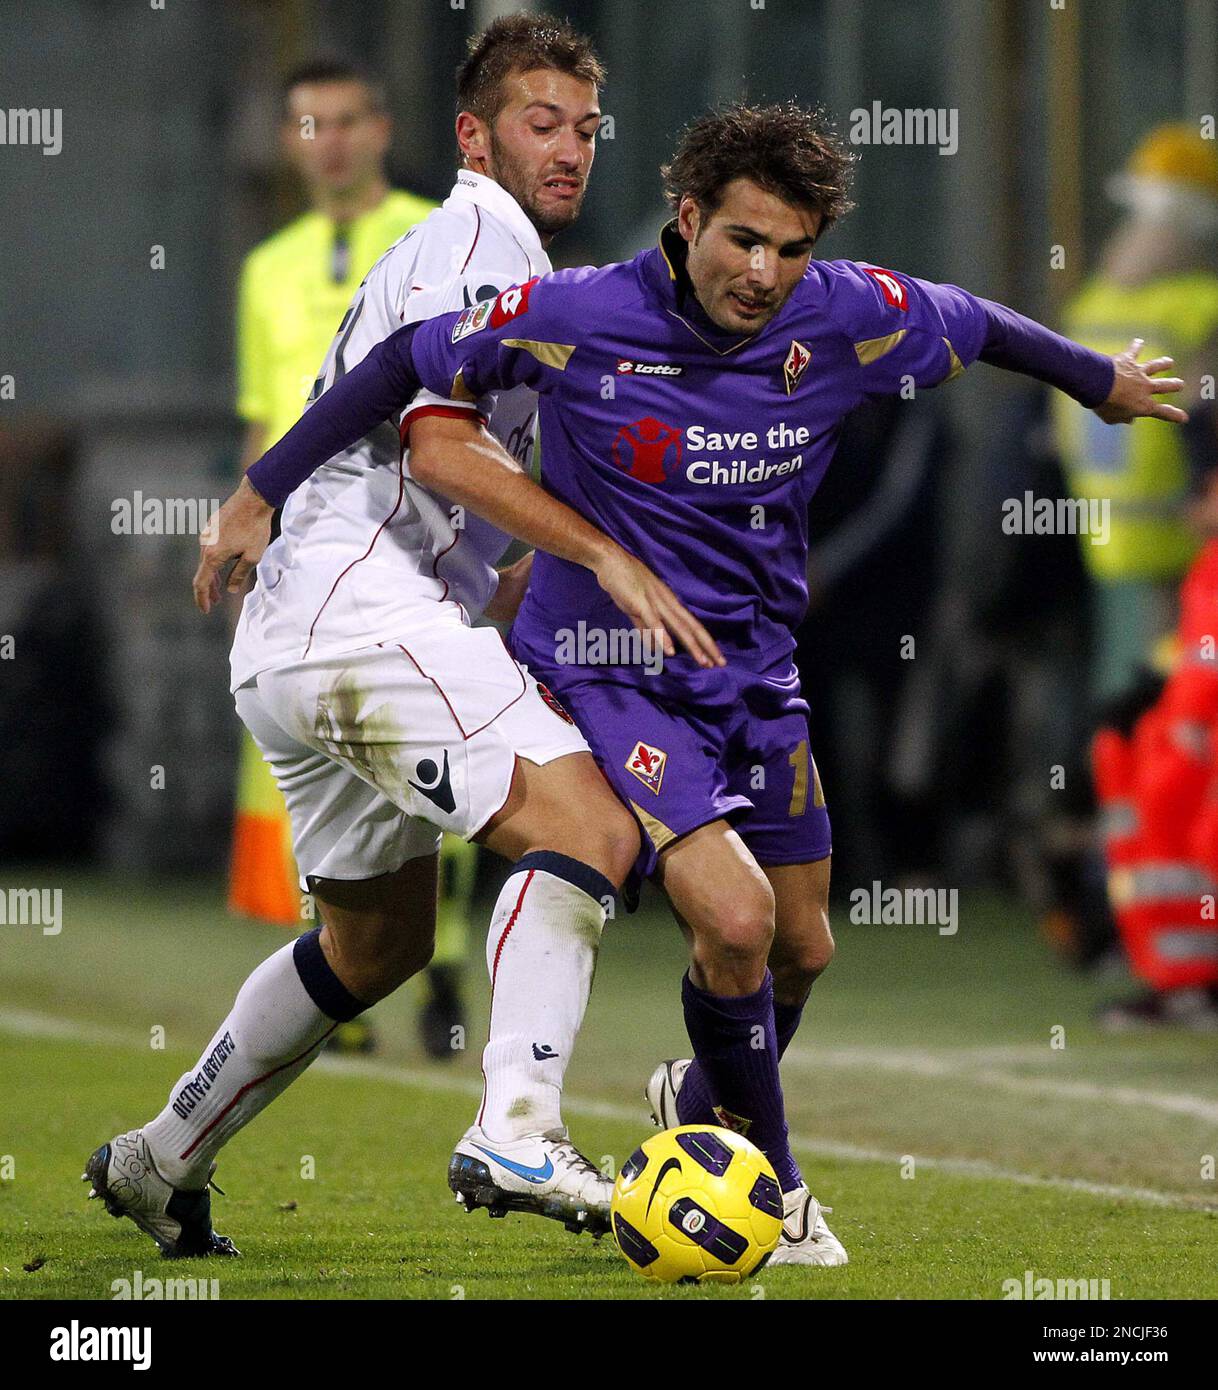 Fiorentina's Adrian Mutu of Romania, right, is challenged by Cagliari's  Michele Canini during a Serie A soccer match at the Artemio Franchi stadium  in Florence, Italy, Sunday, Dec. 5, 2010. Fiorentina won